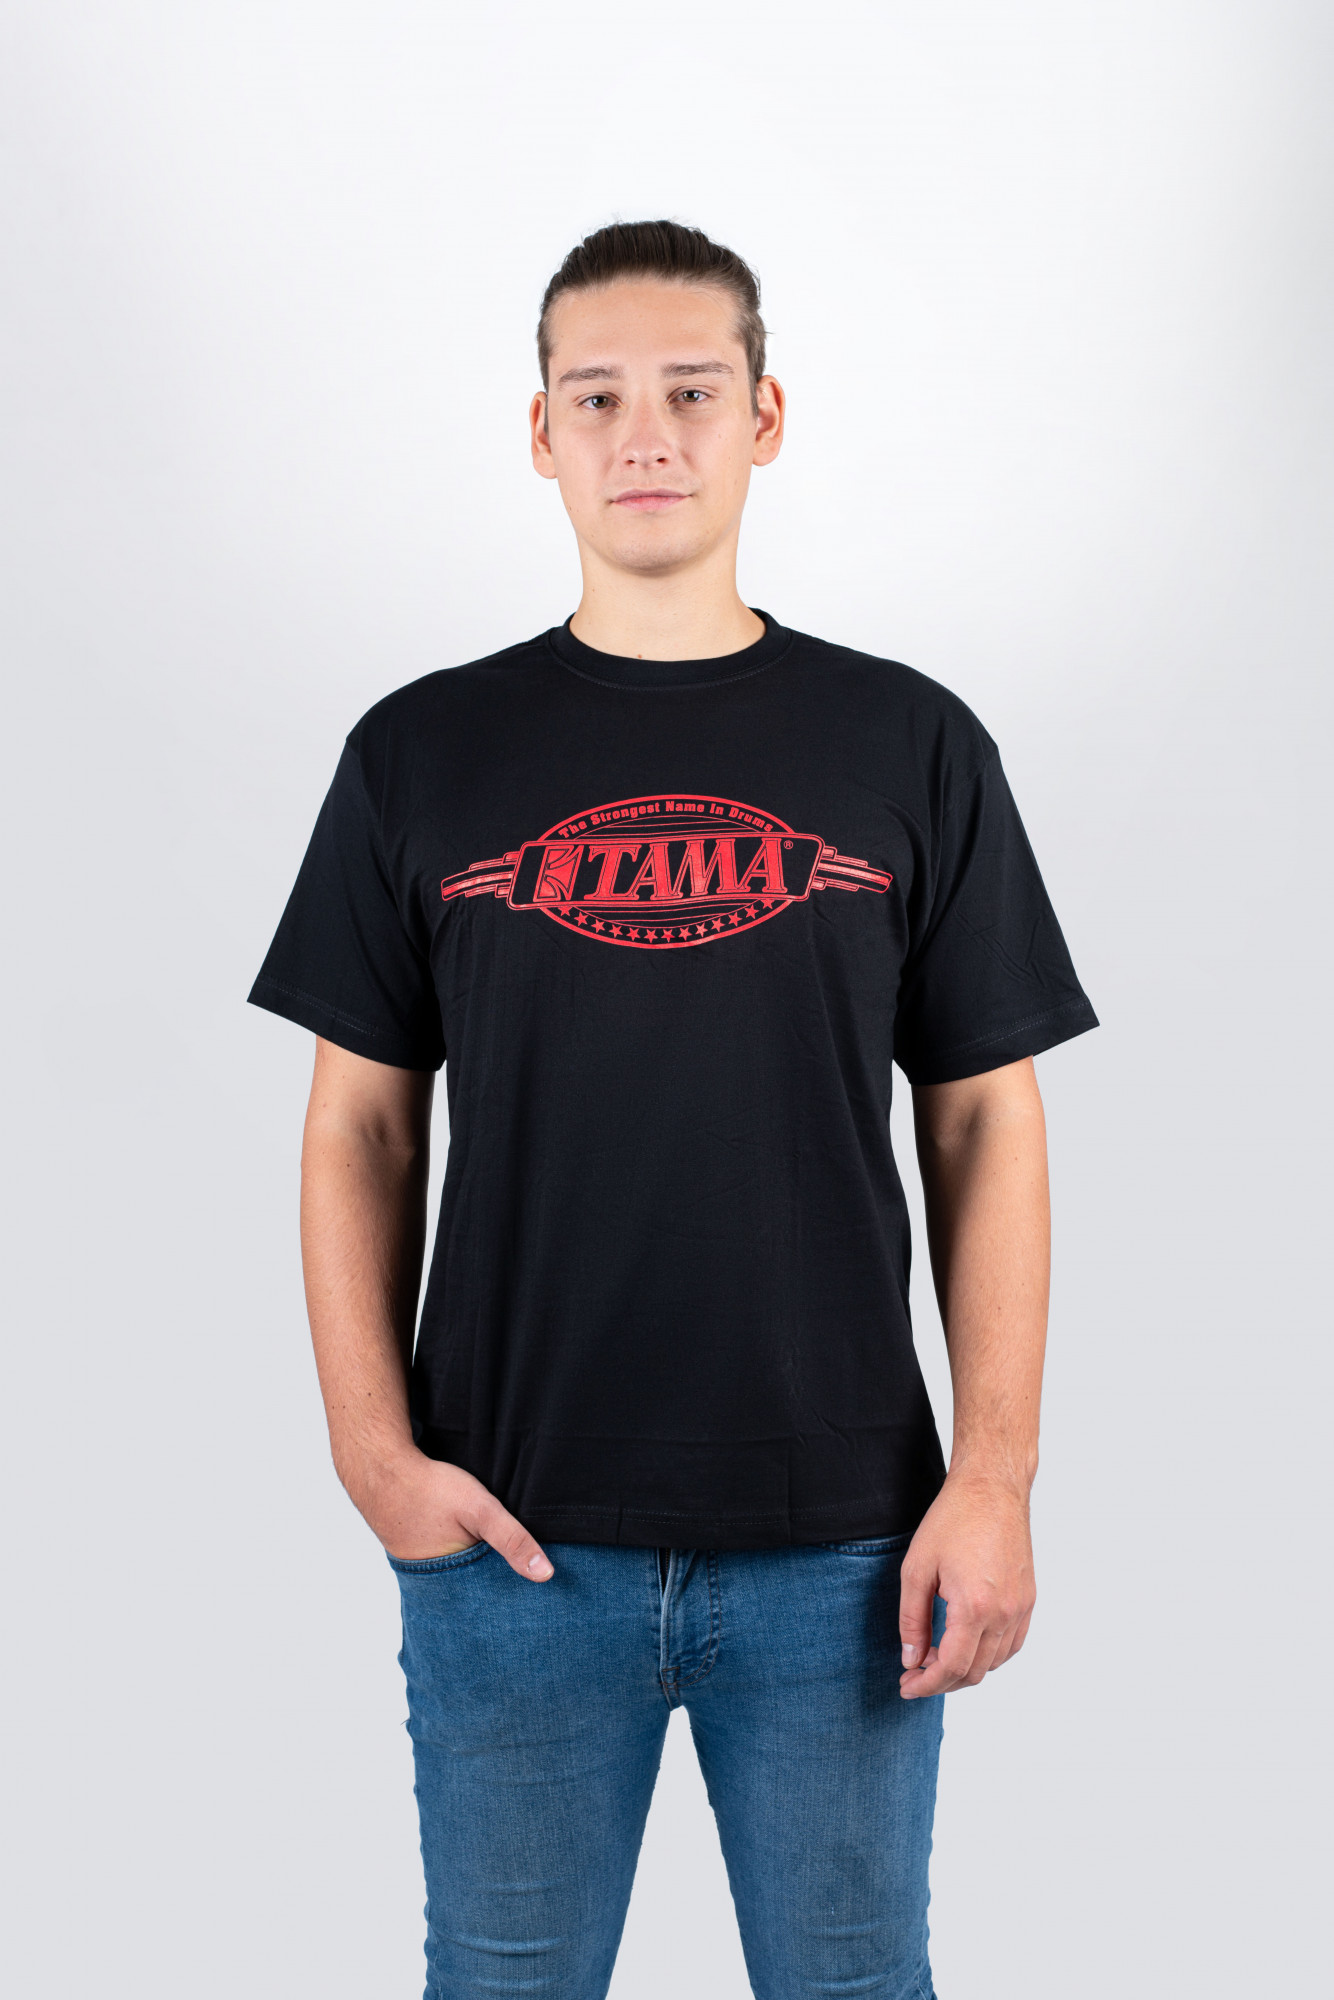 t-shirt in black with red "The name in drums" frontprint (TT109) | | Merchandise | Tama | MEINL Shop